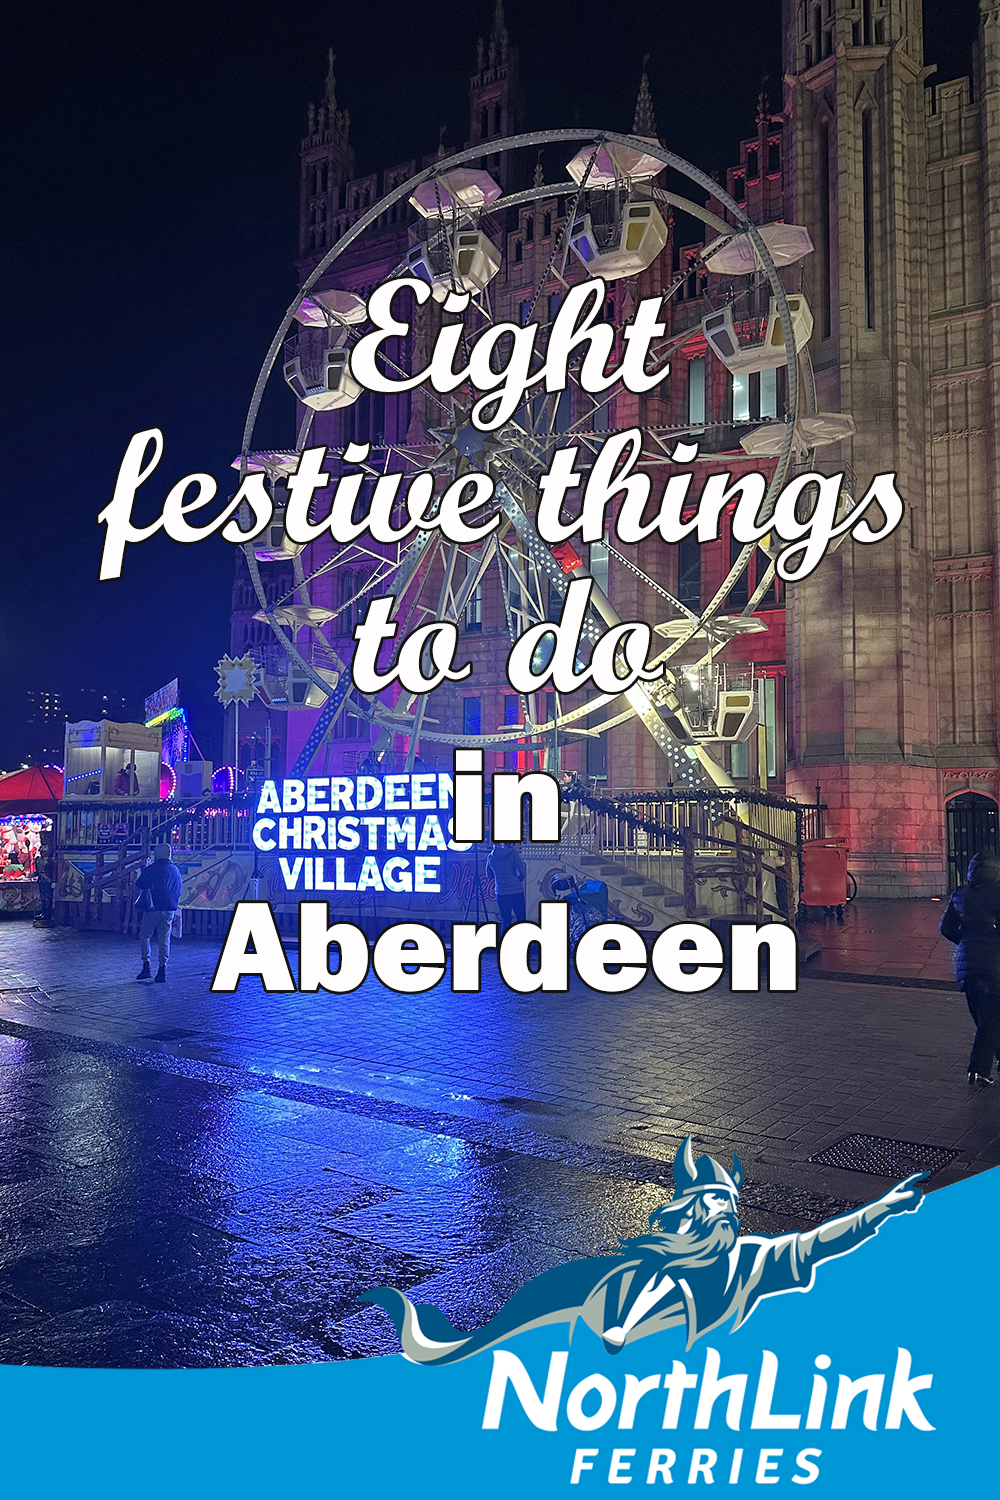 Eight festive things to do in Aberdeen